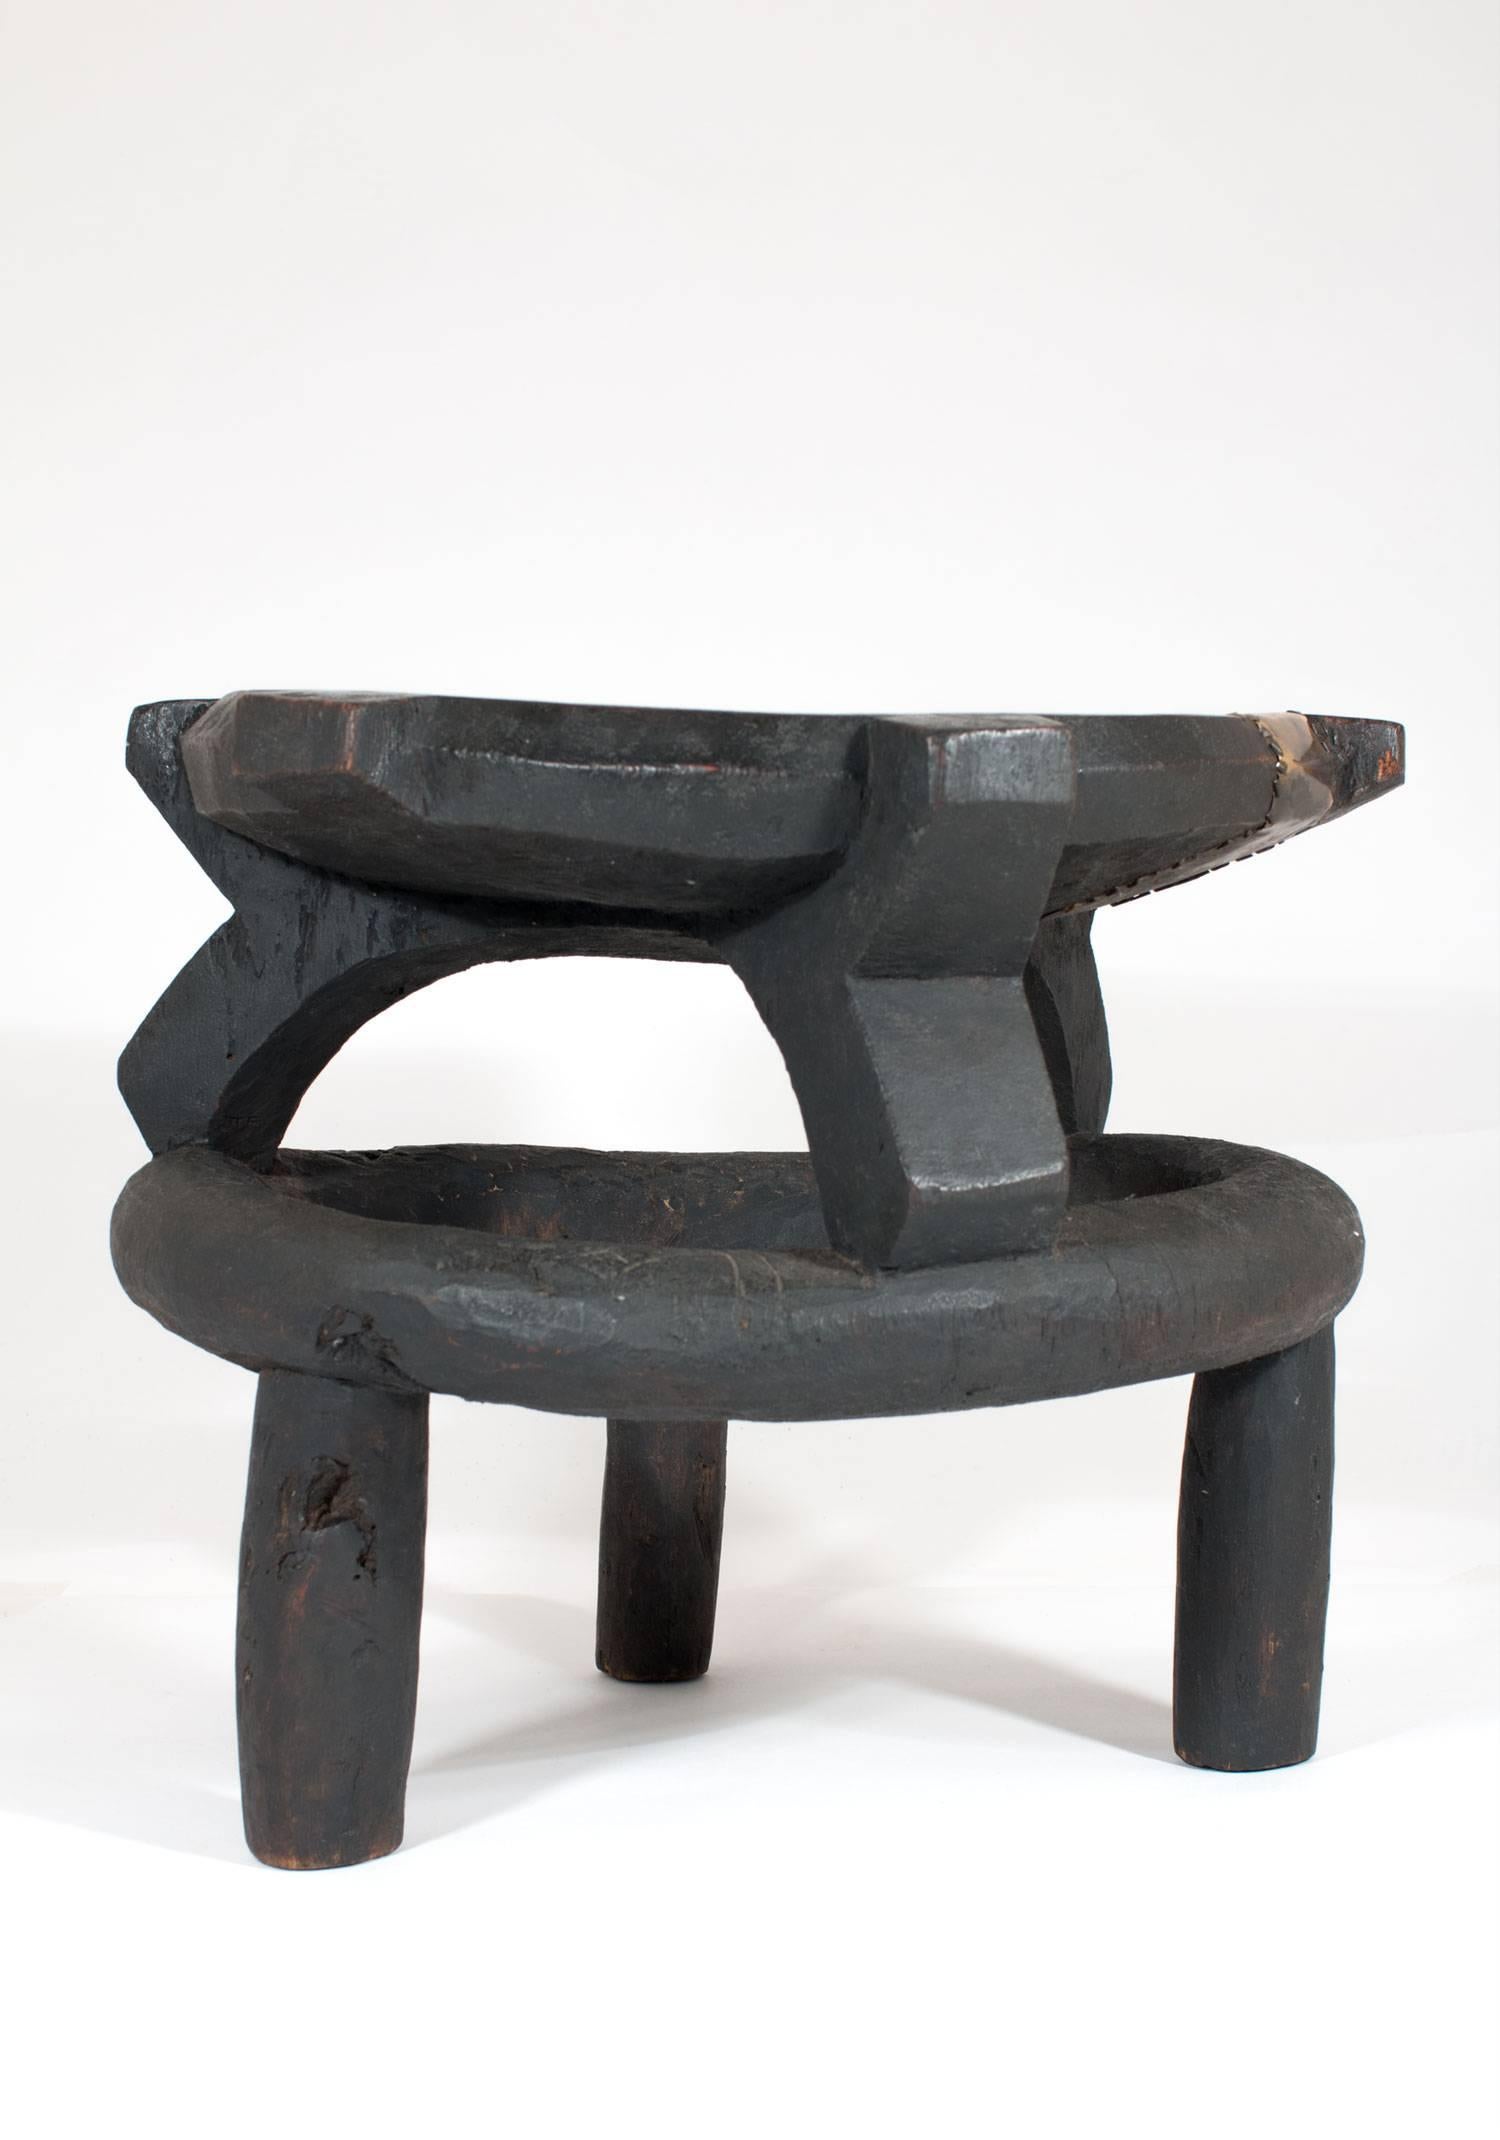 A hand-carved wooden stool from Tanzania with a native repair made from hand-hammered brass. This piece is very cool with a tribal vibe.